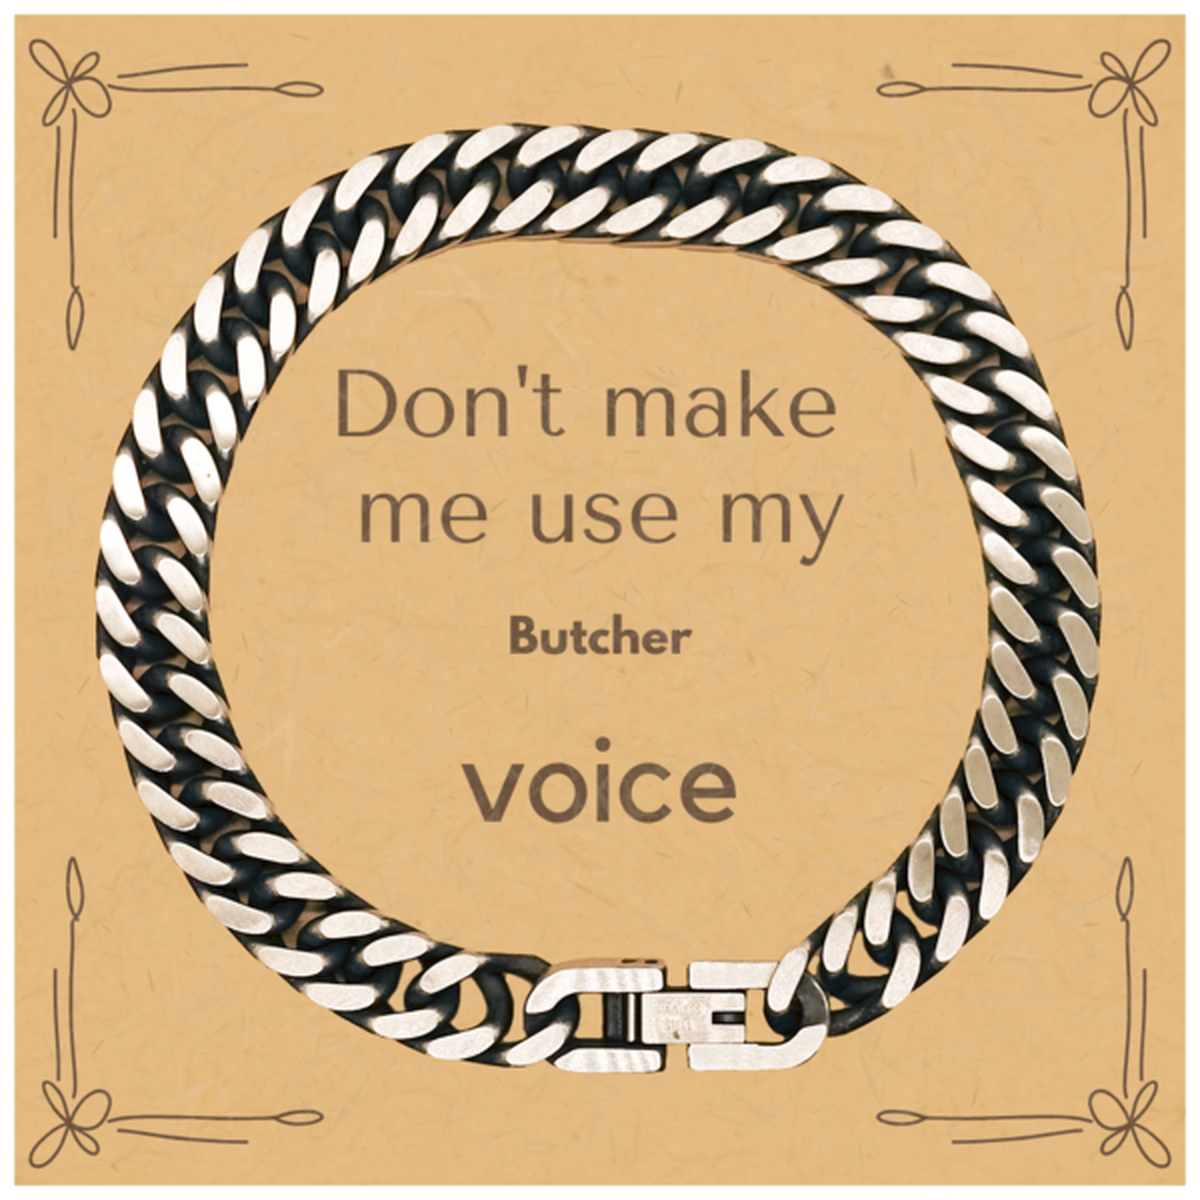 Don't make me use my Butcher voice, Sarcasm Butcher Card Gifts, Christmas Butcher Cuban Link Chain Bracelet Birthday Unique Gifts For Butcher Coworkers, Men, Women, Colleague, Friends